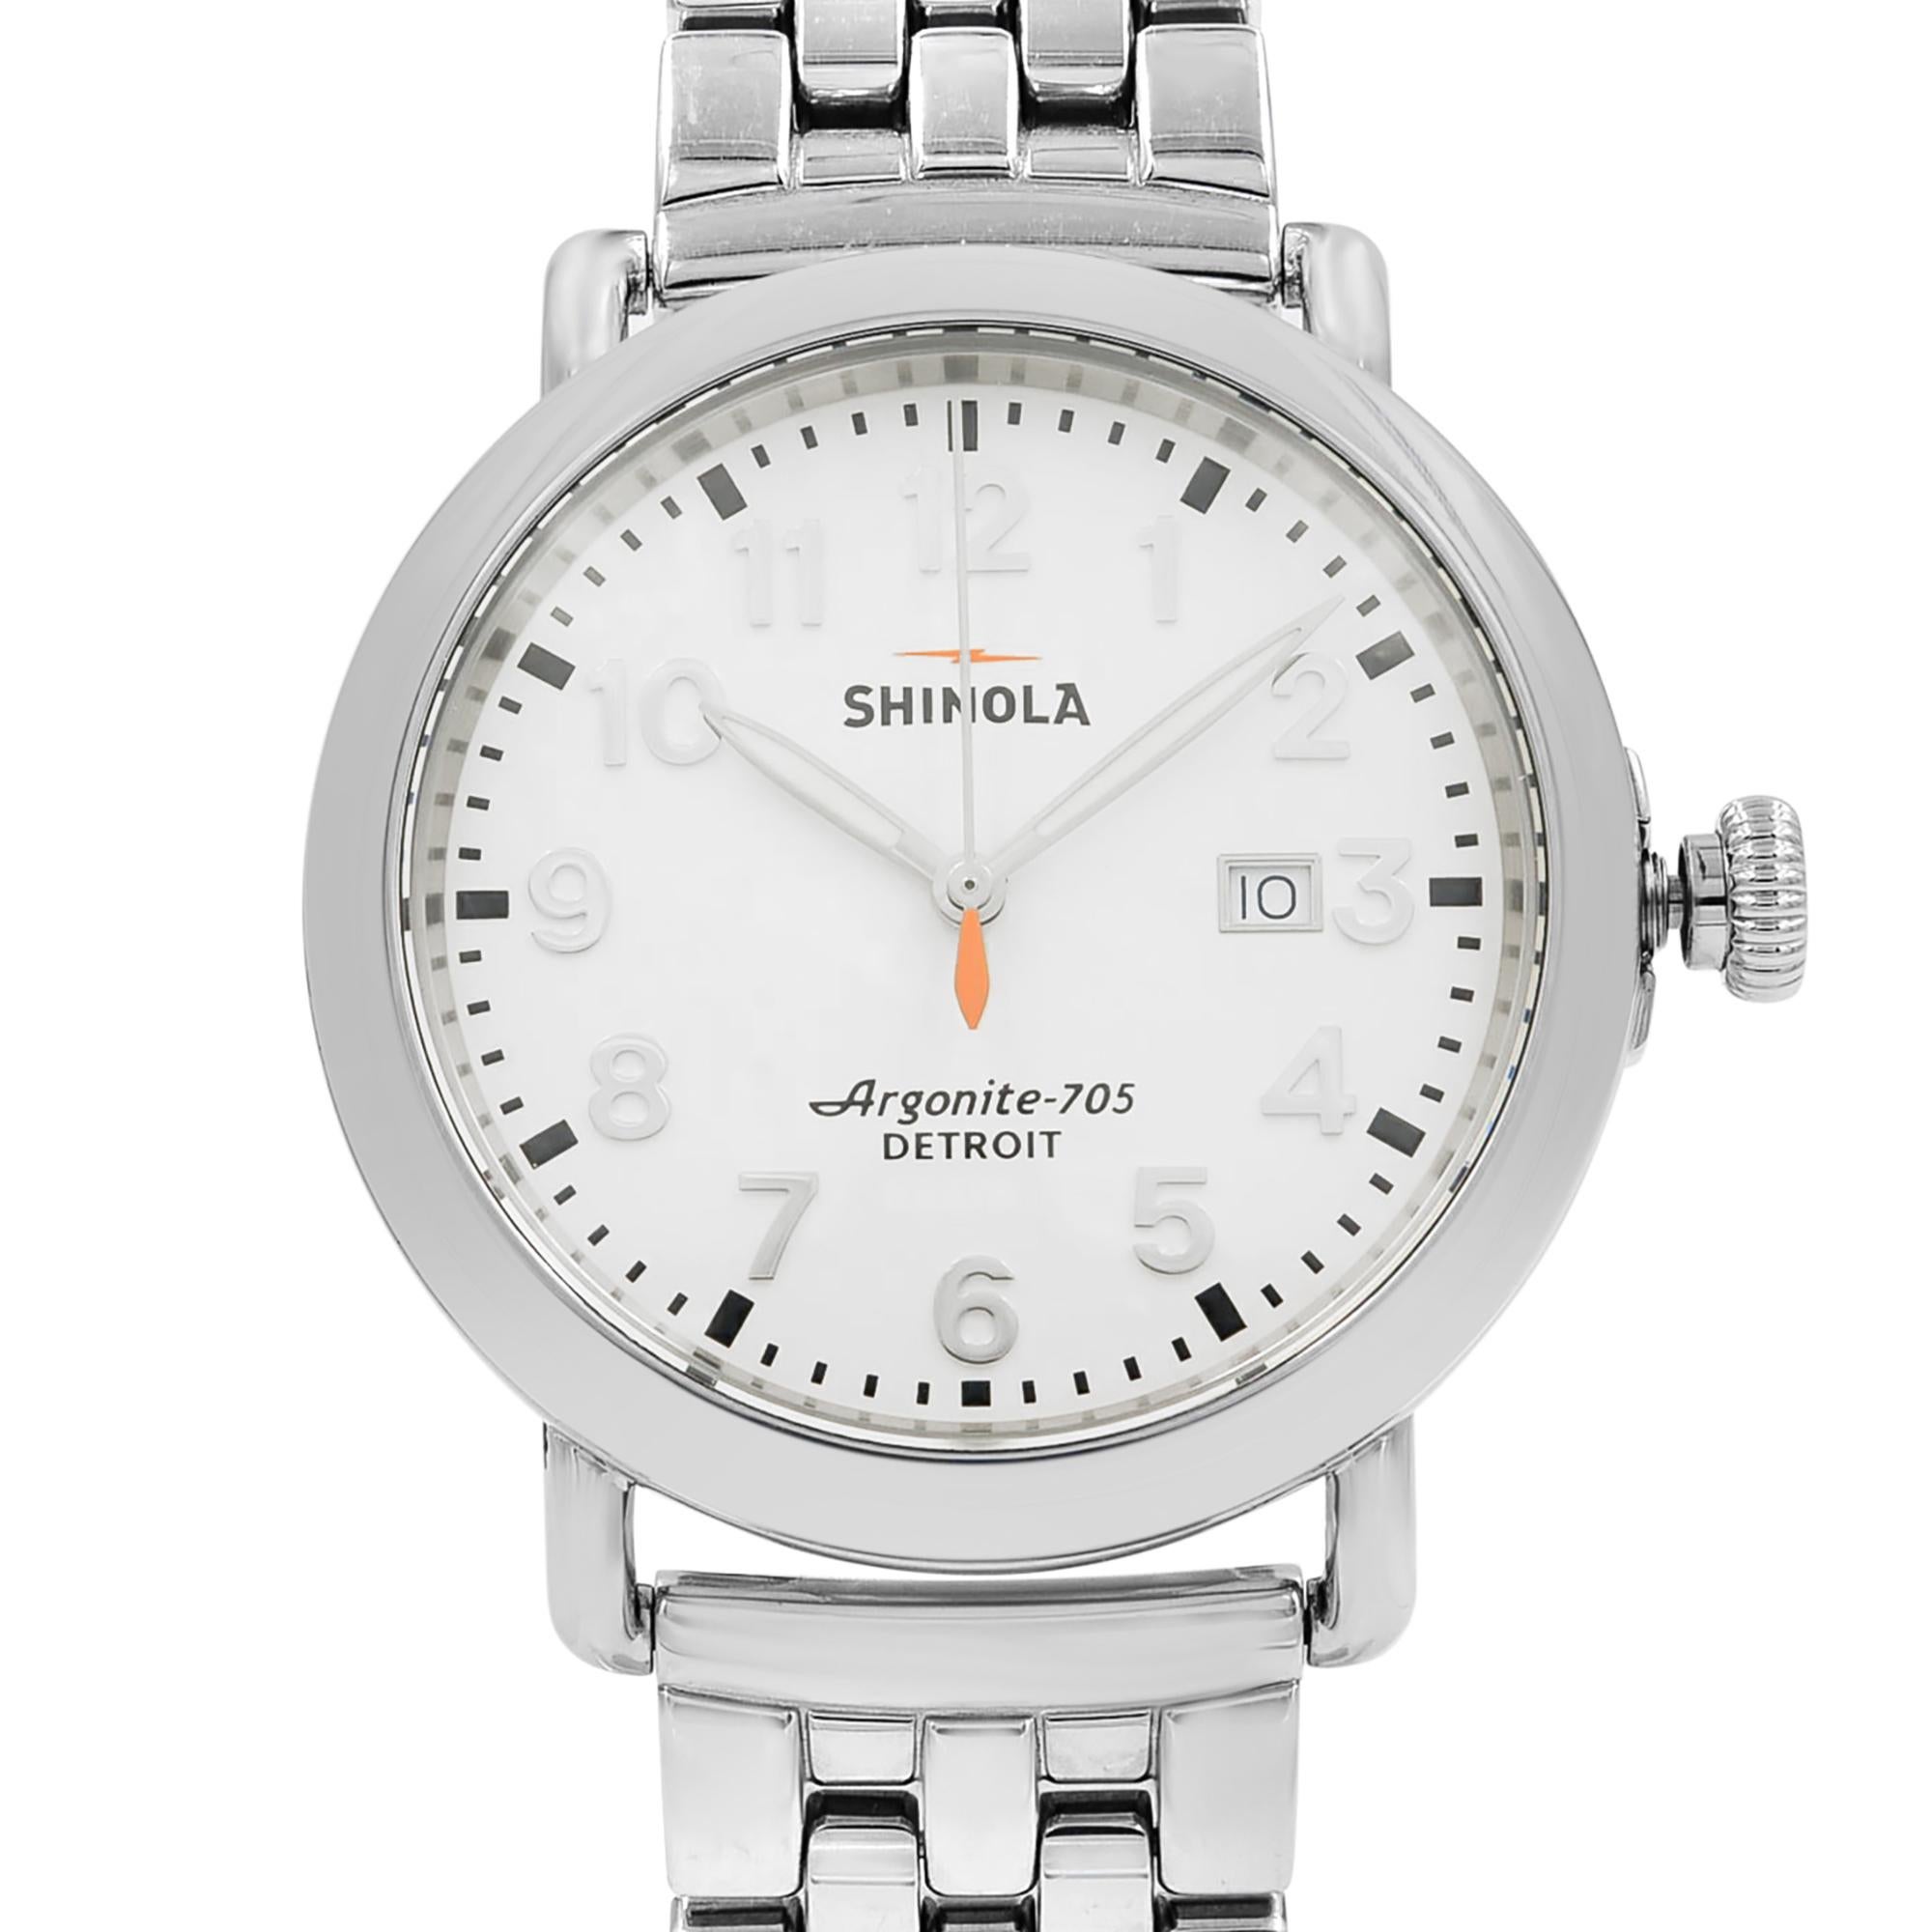 This Shinola men's watch is pre-owned and in good condition. Insignificant marks on the dial. No original box and papers are included. Comes with a presentation box and authenticity card. 

Brand: Shinola  Type: Wristwatch  Department: Men  Model